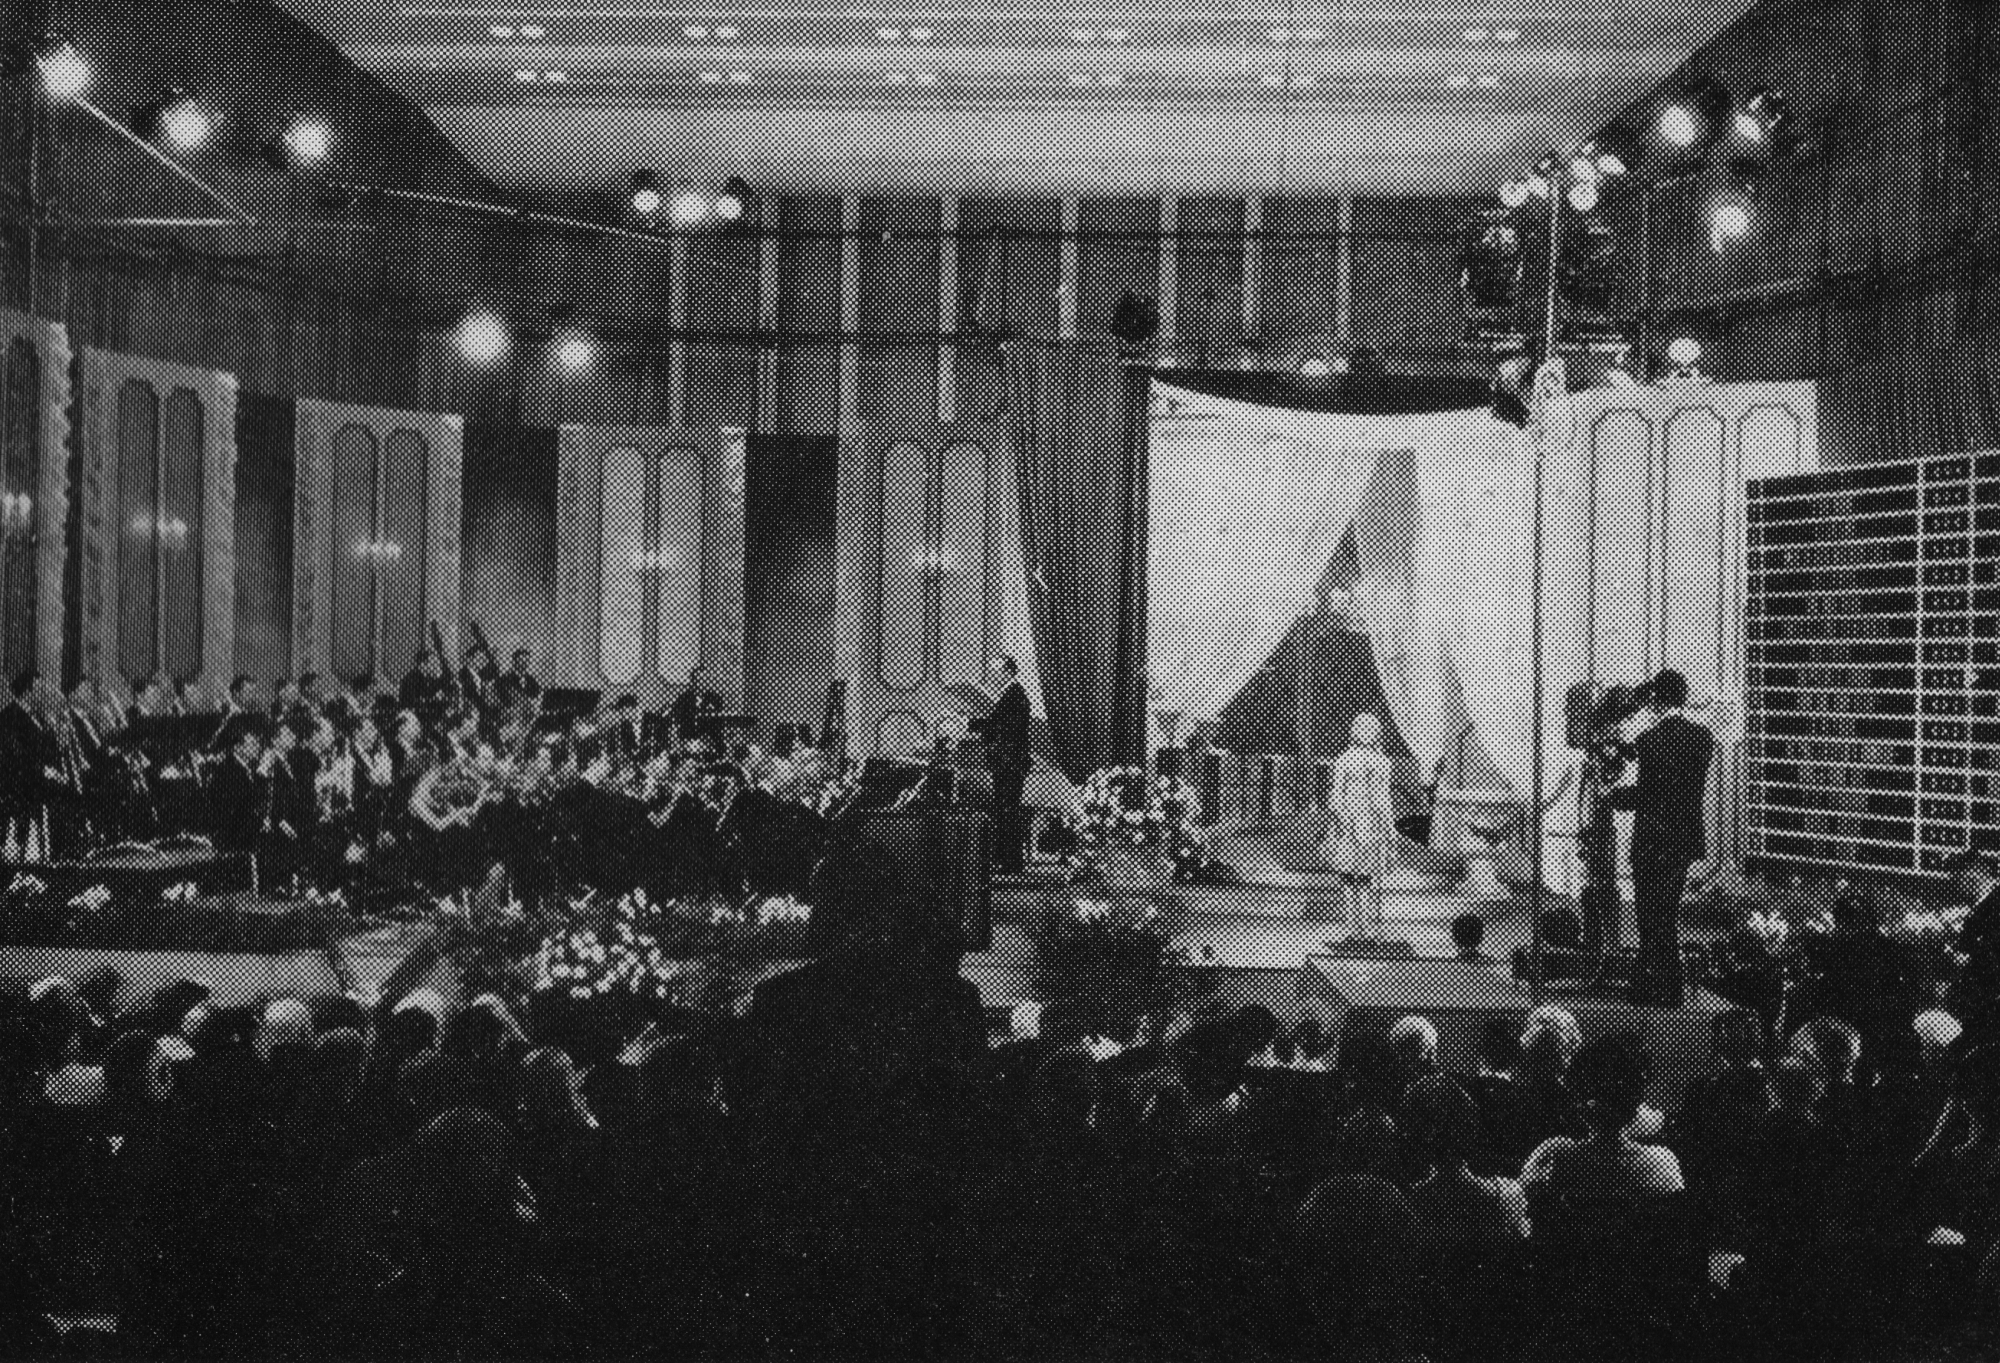 The set of the Song Contest with the orchestra visible